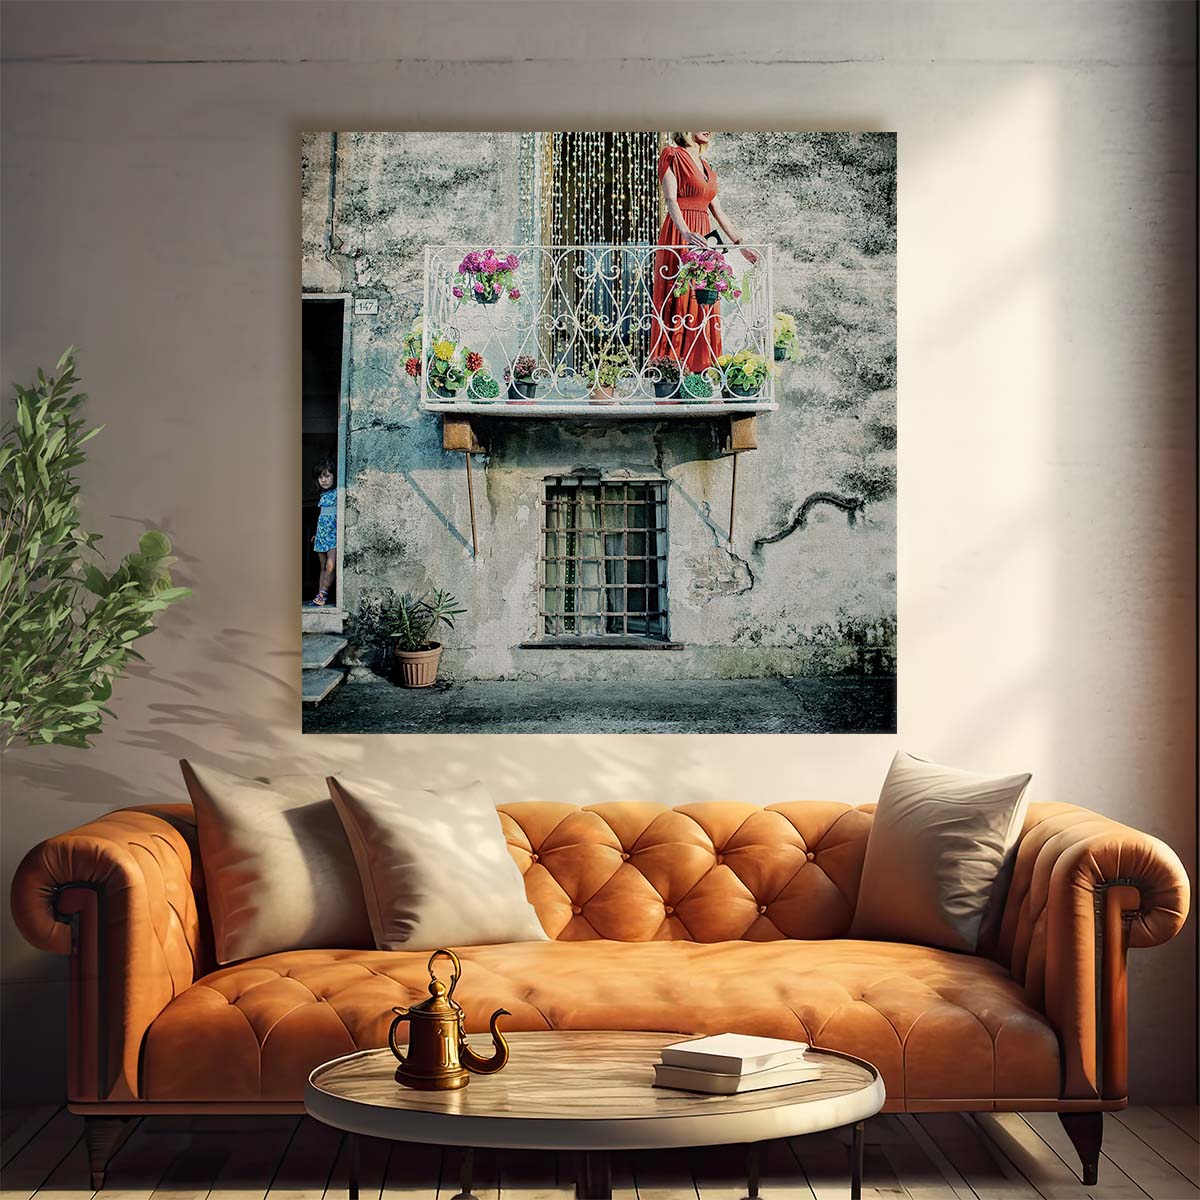 Colorful Summer Floral & Golden Chains Woman Portrait Wall Art by Luxuriance Designs. Made in USA.